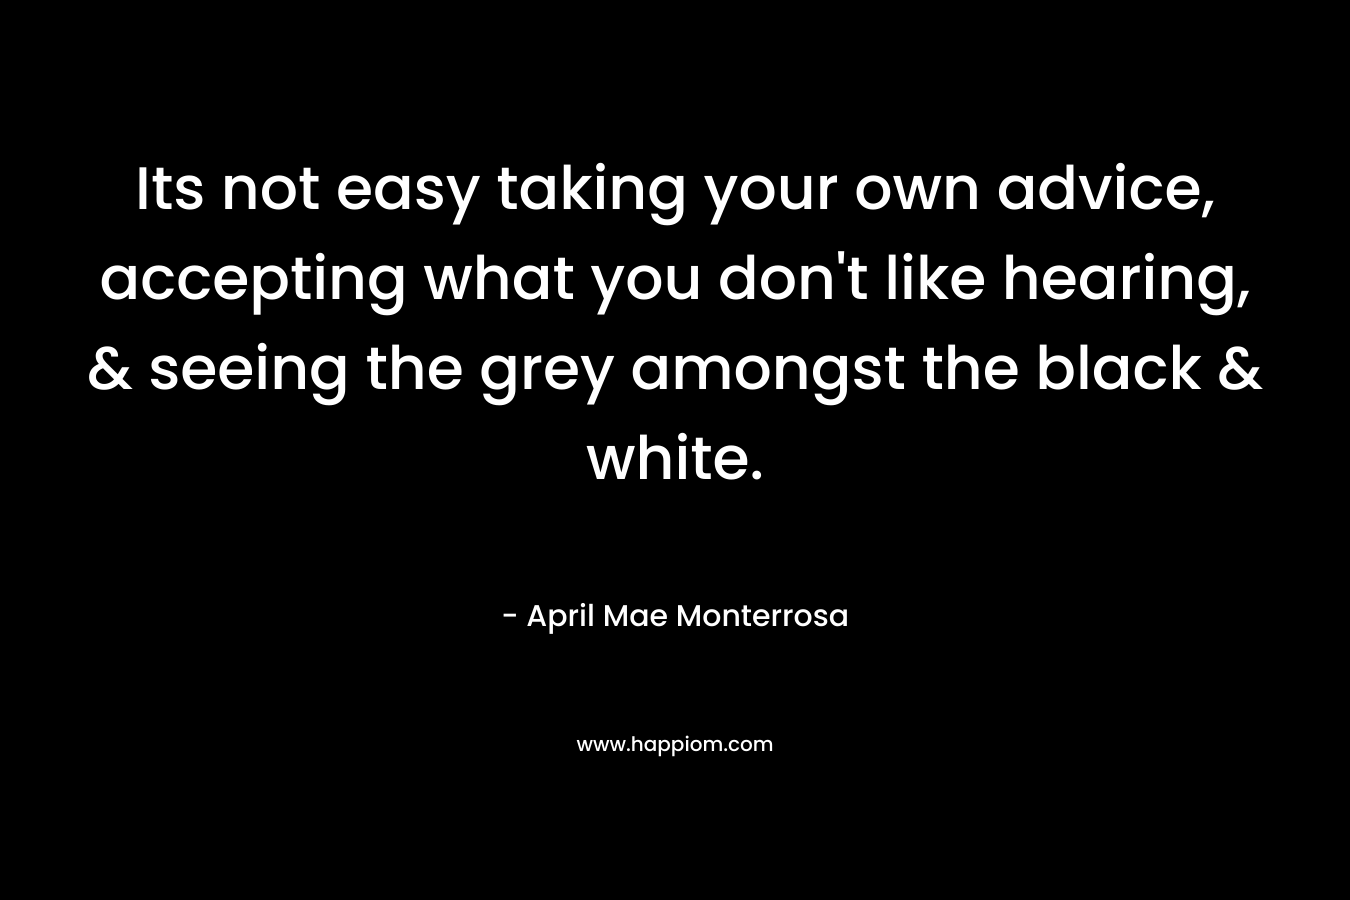 Its not easy taking your own advice, accepting what you don’t like hearing, & seeing the grey amongst the black & white. – April Mae Monterrosa